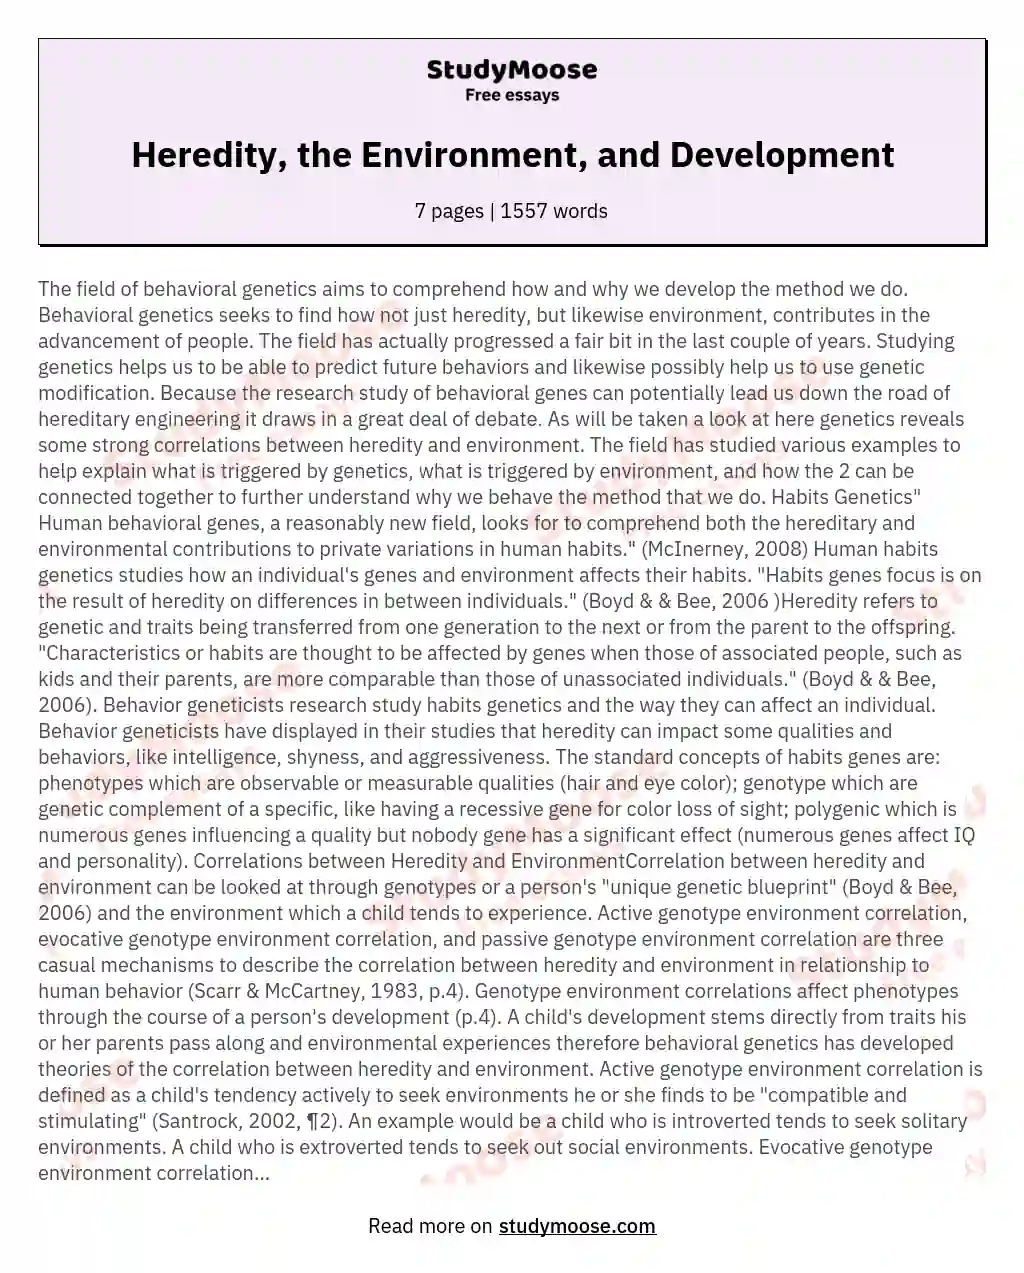 Heredity, the Environment, and Development essay